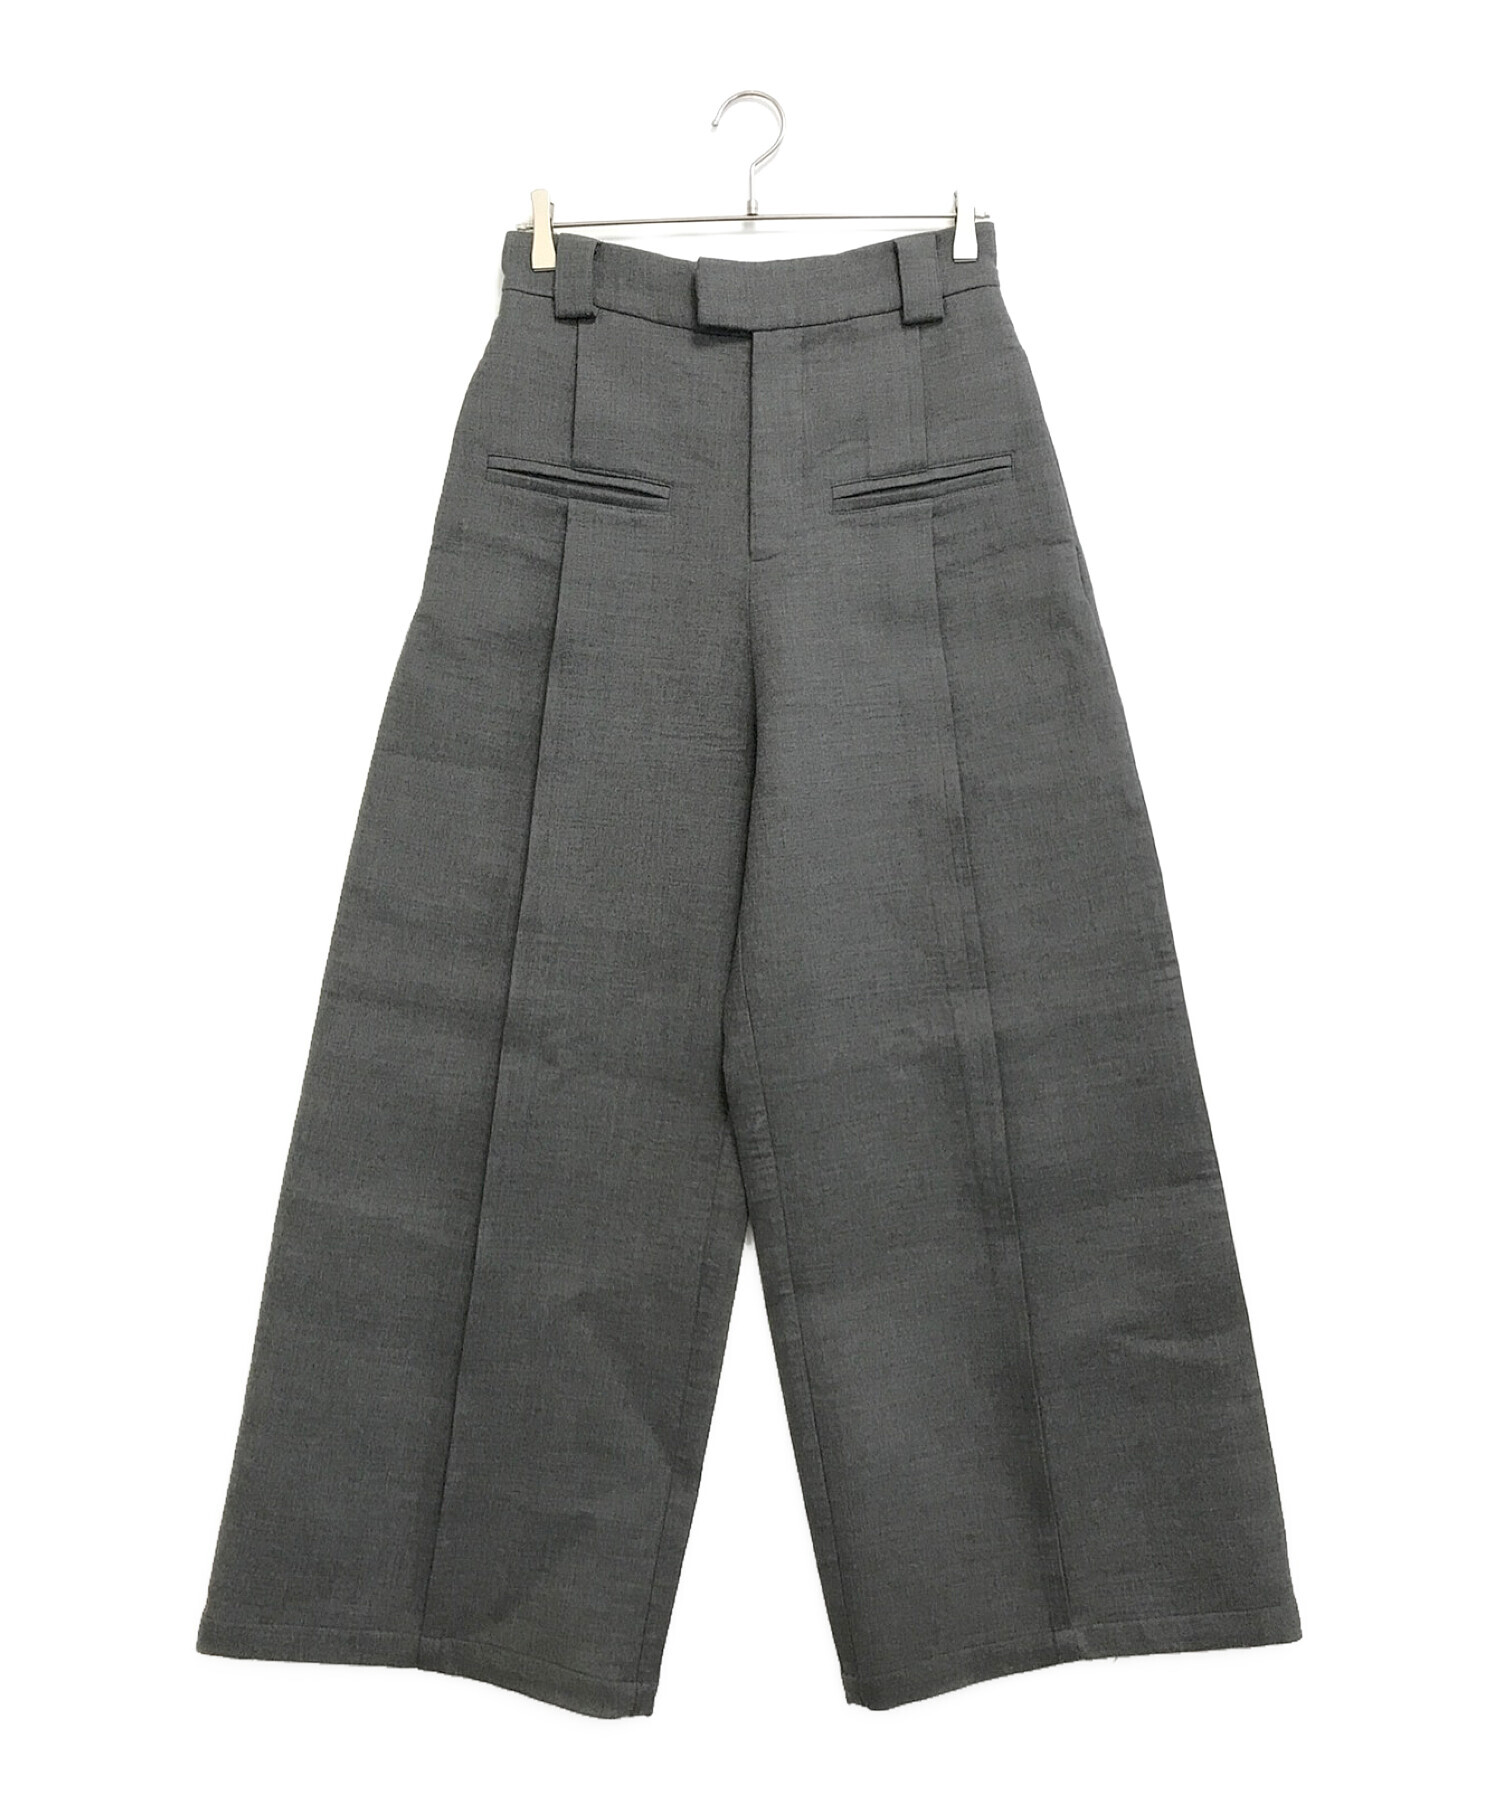 FaxCopyExpresshand in front pocket Pant L